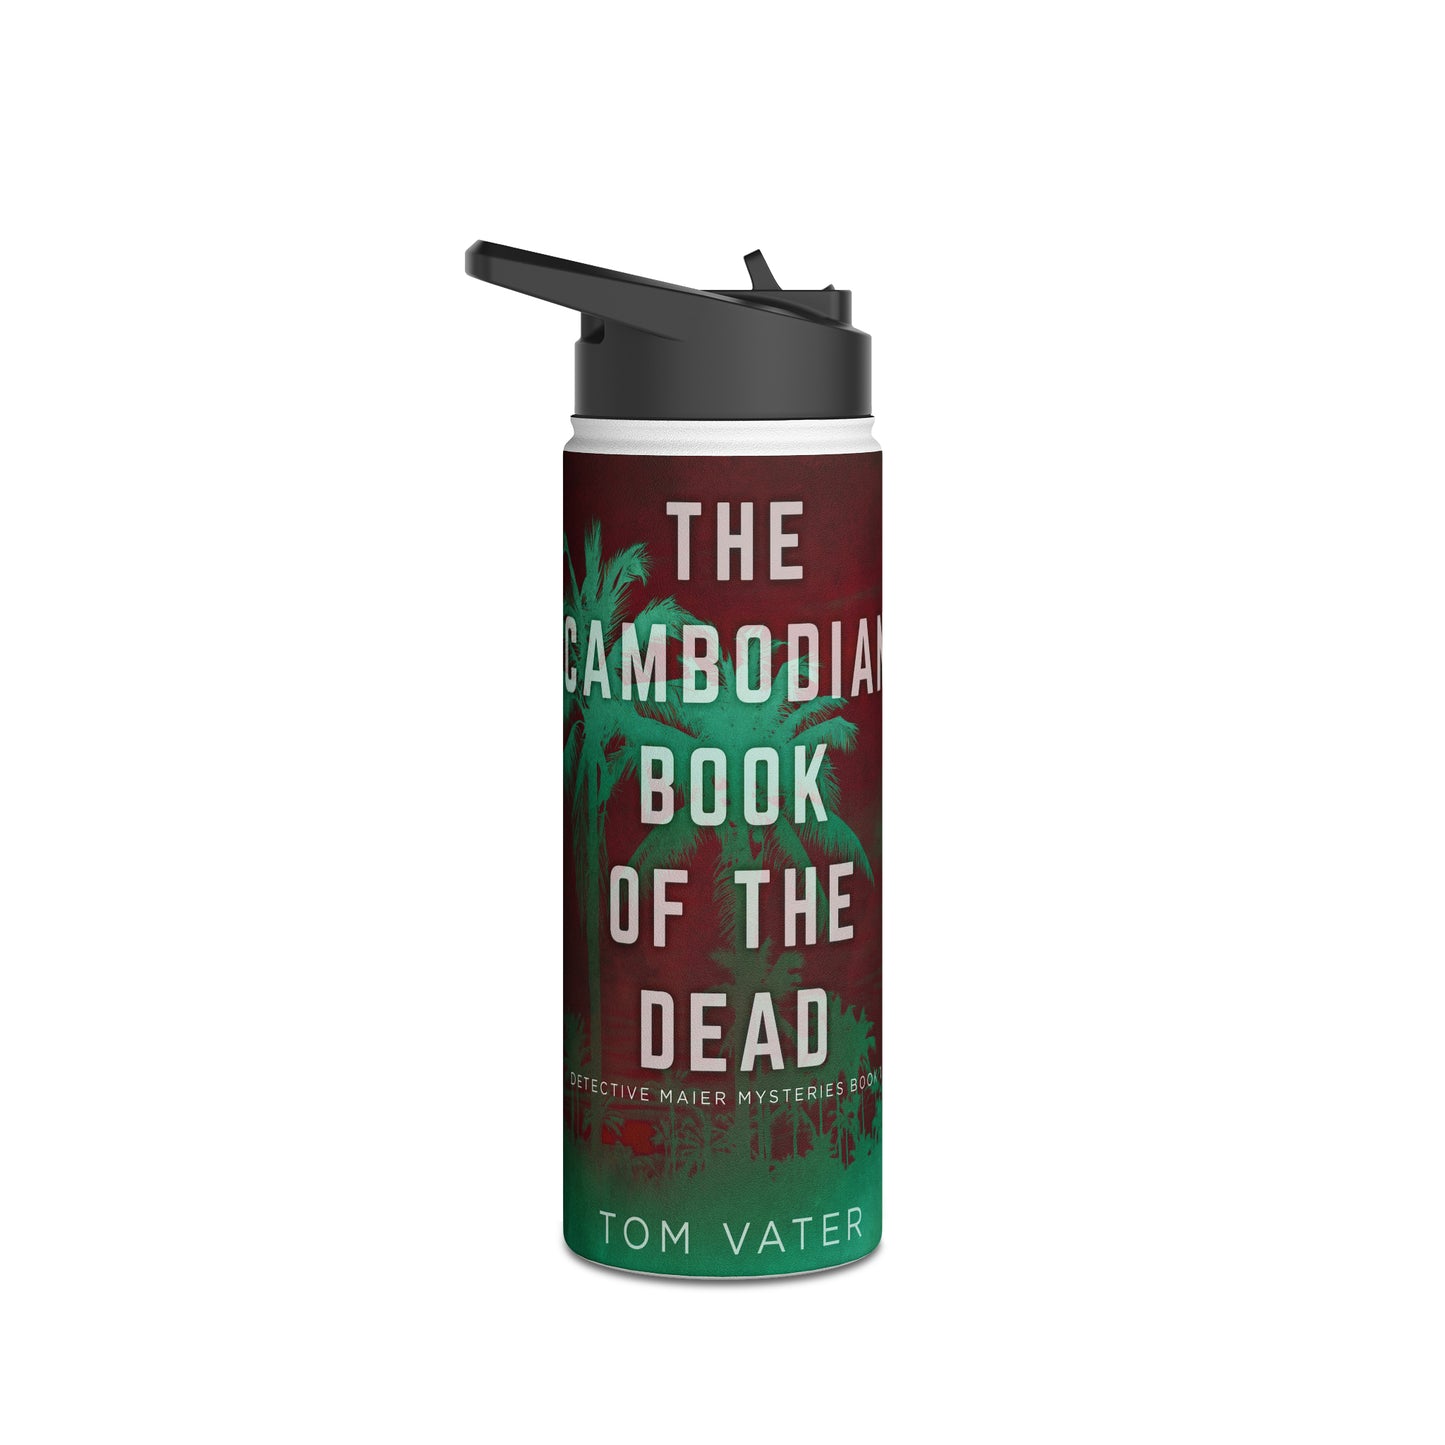 The Cambodian Book Of The Dead - Stainless Steel Water Bottle